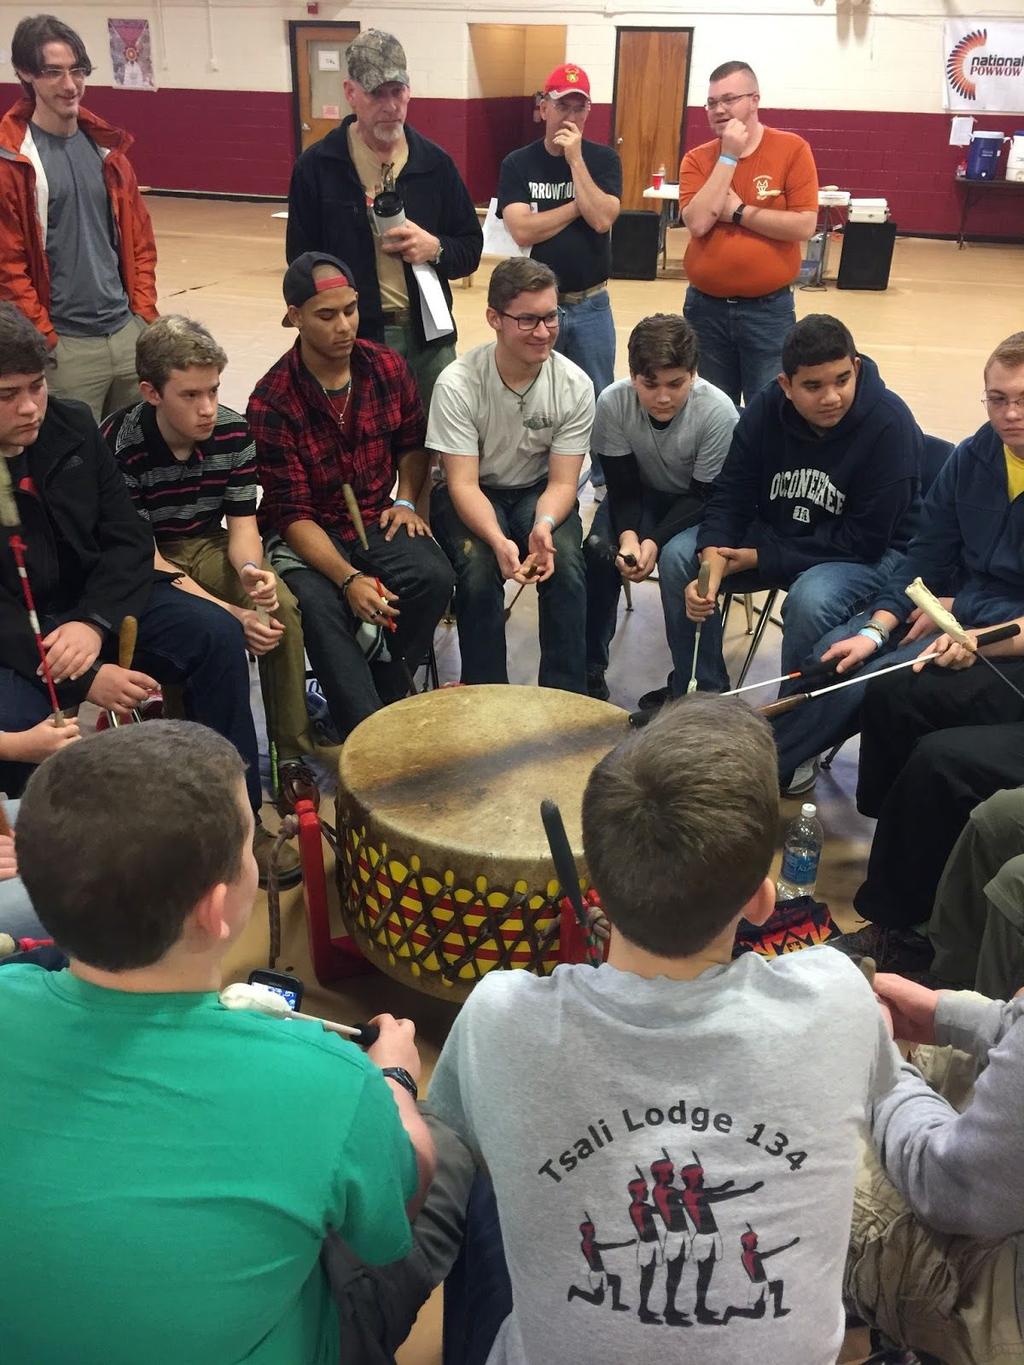 There was a great source of knowledge and fun through the whole weekend. The Friday night drum session was very intense, as it was my first pow-wow experience on the southern drum.